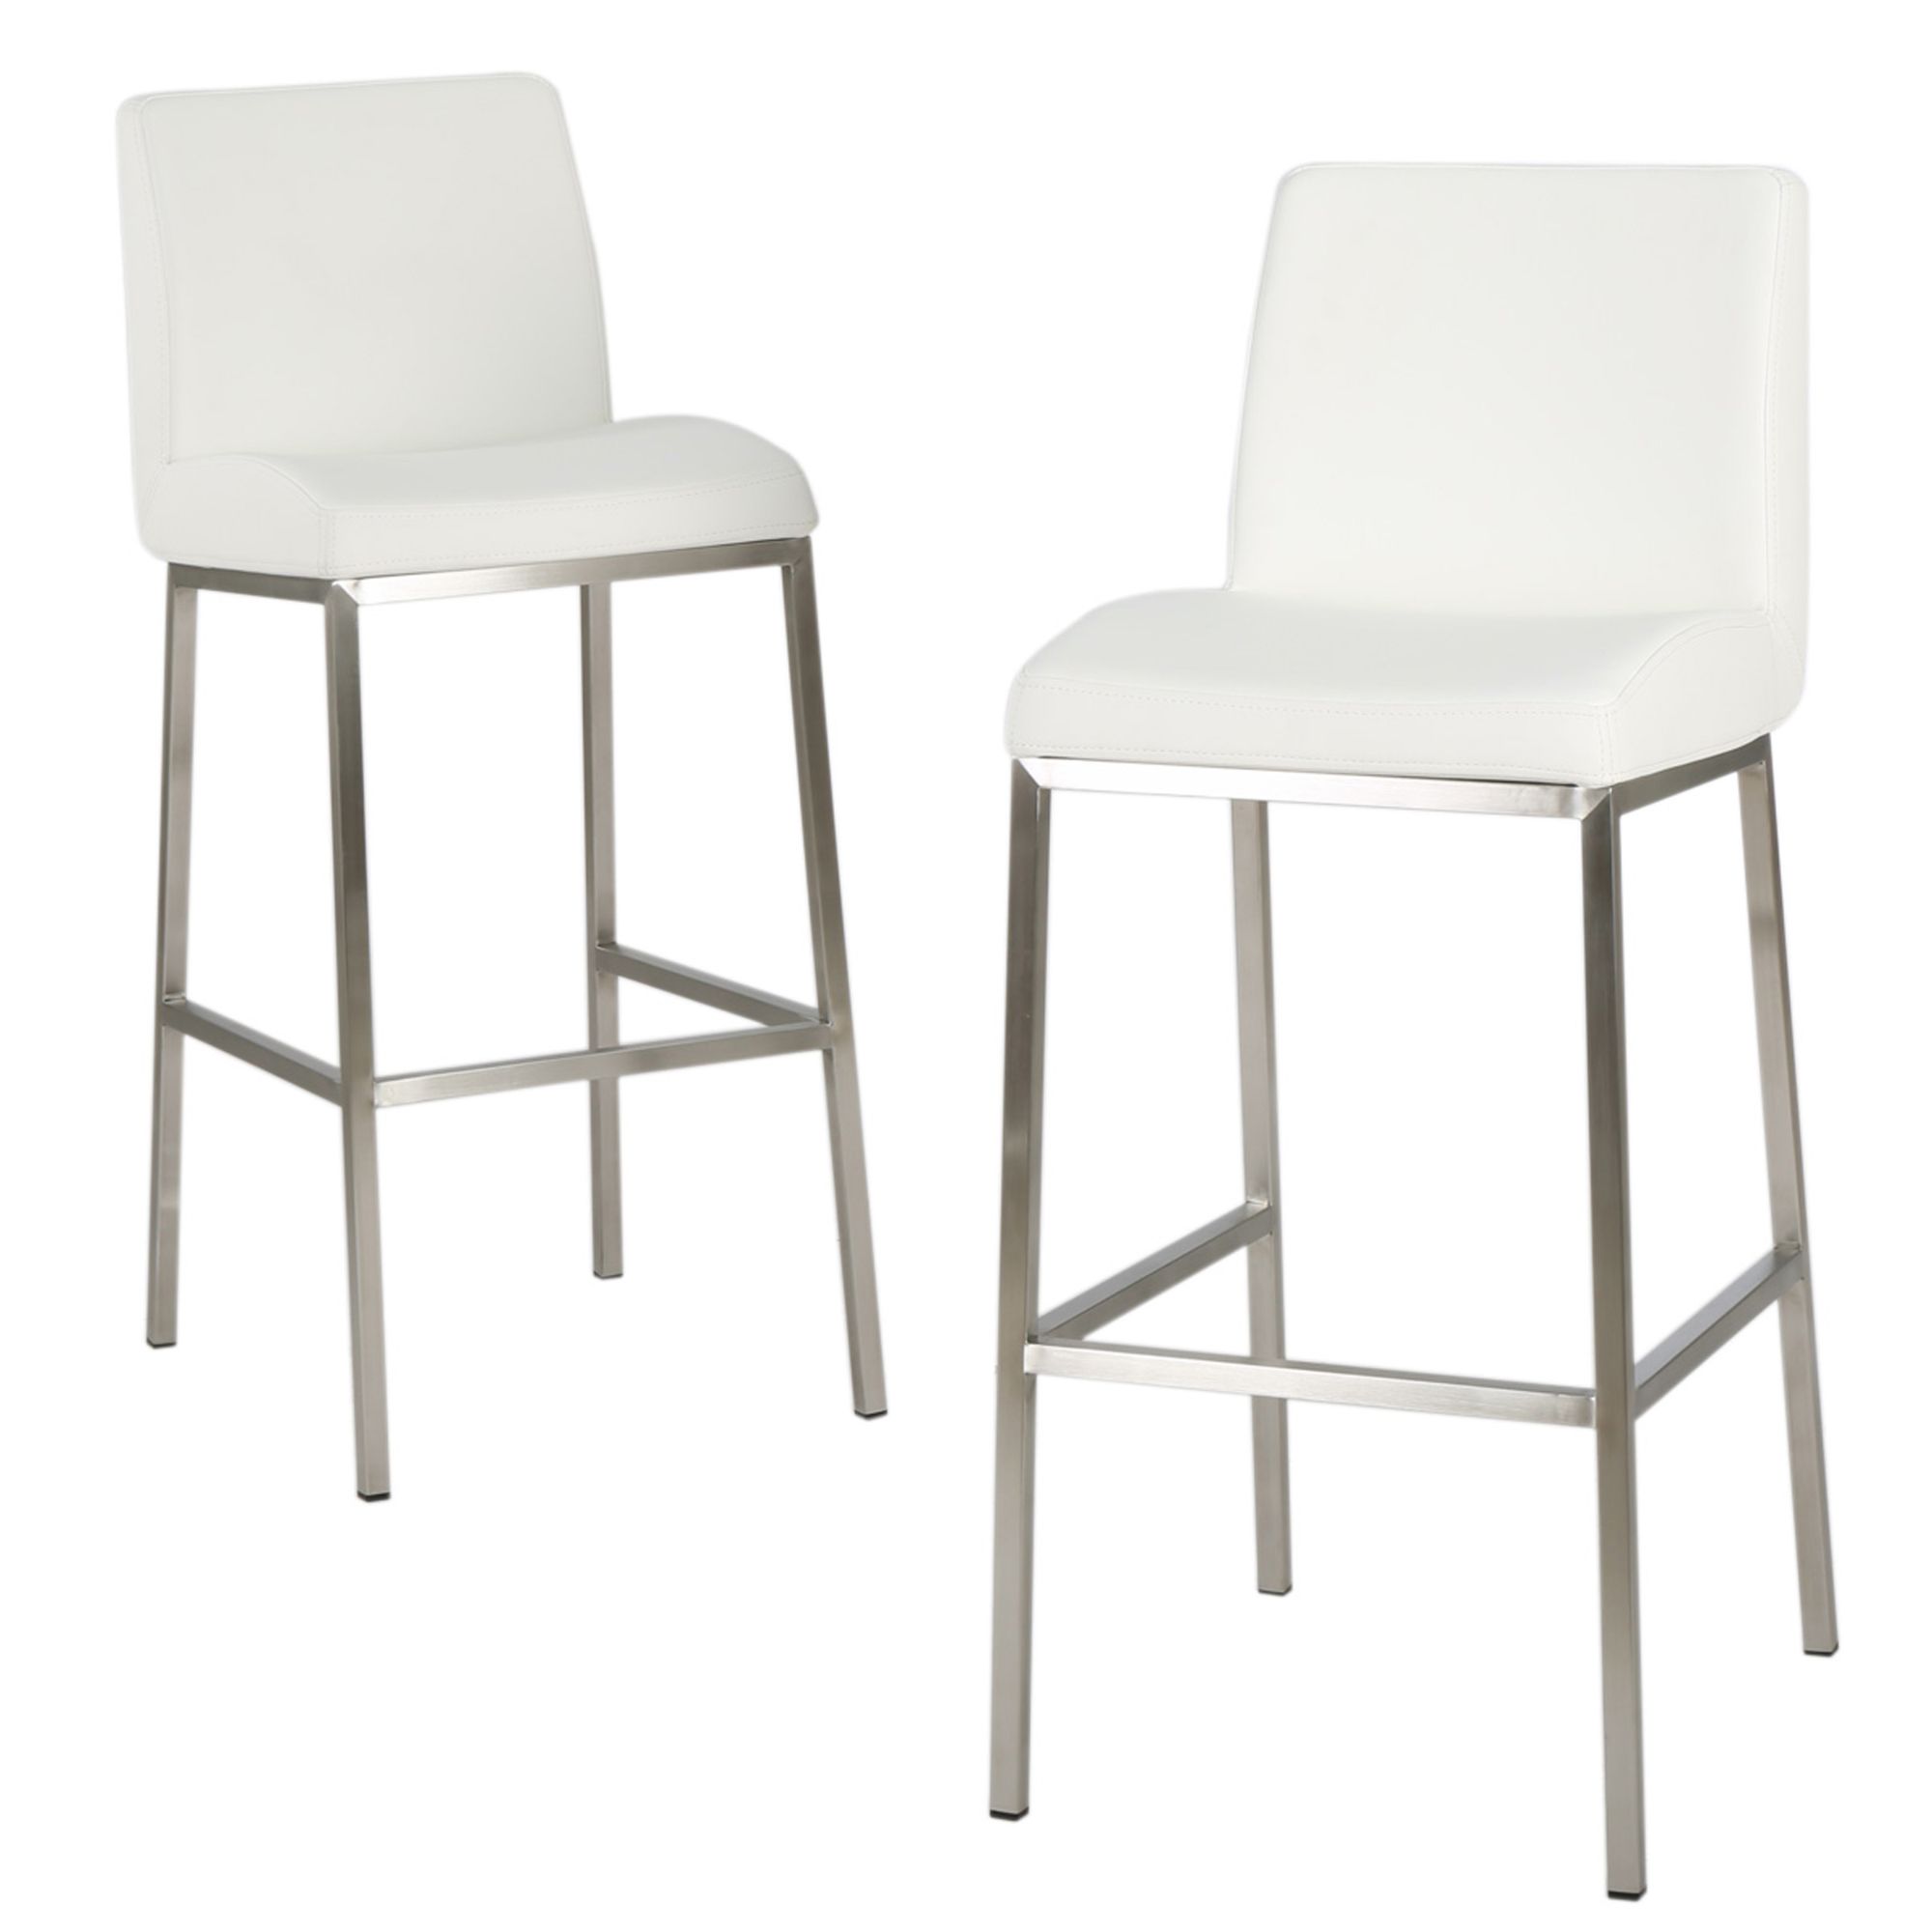 Silver Contemporary Bar Stools 40 25, White Leather Bar Stools Contemporary